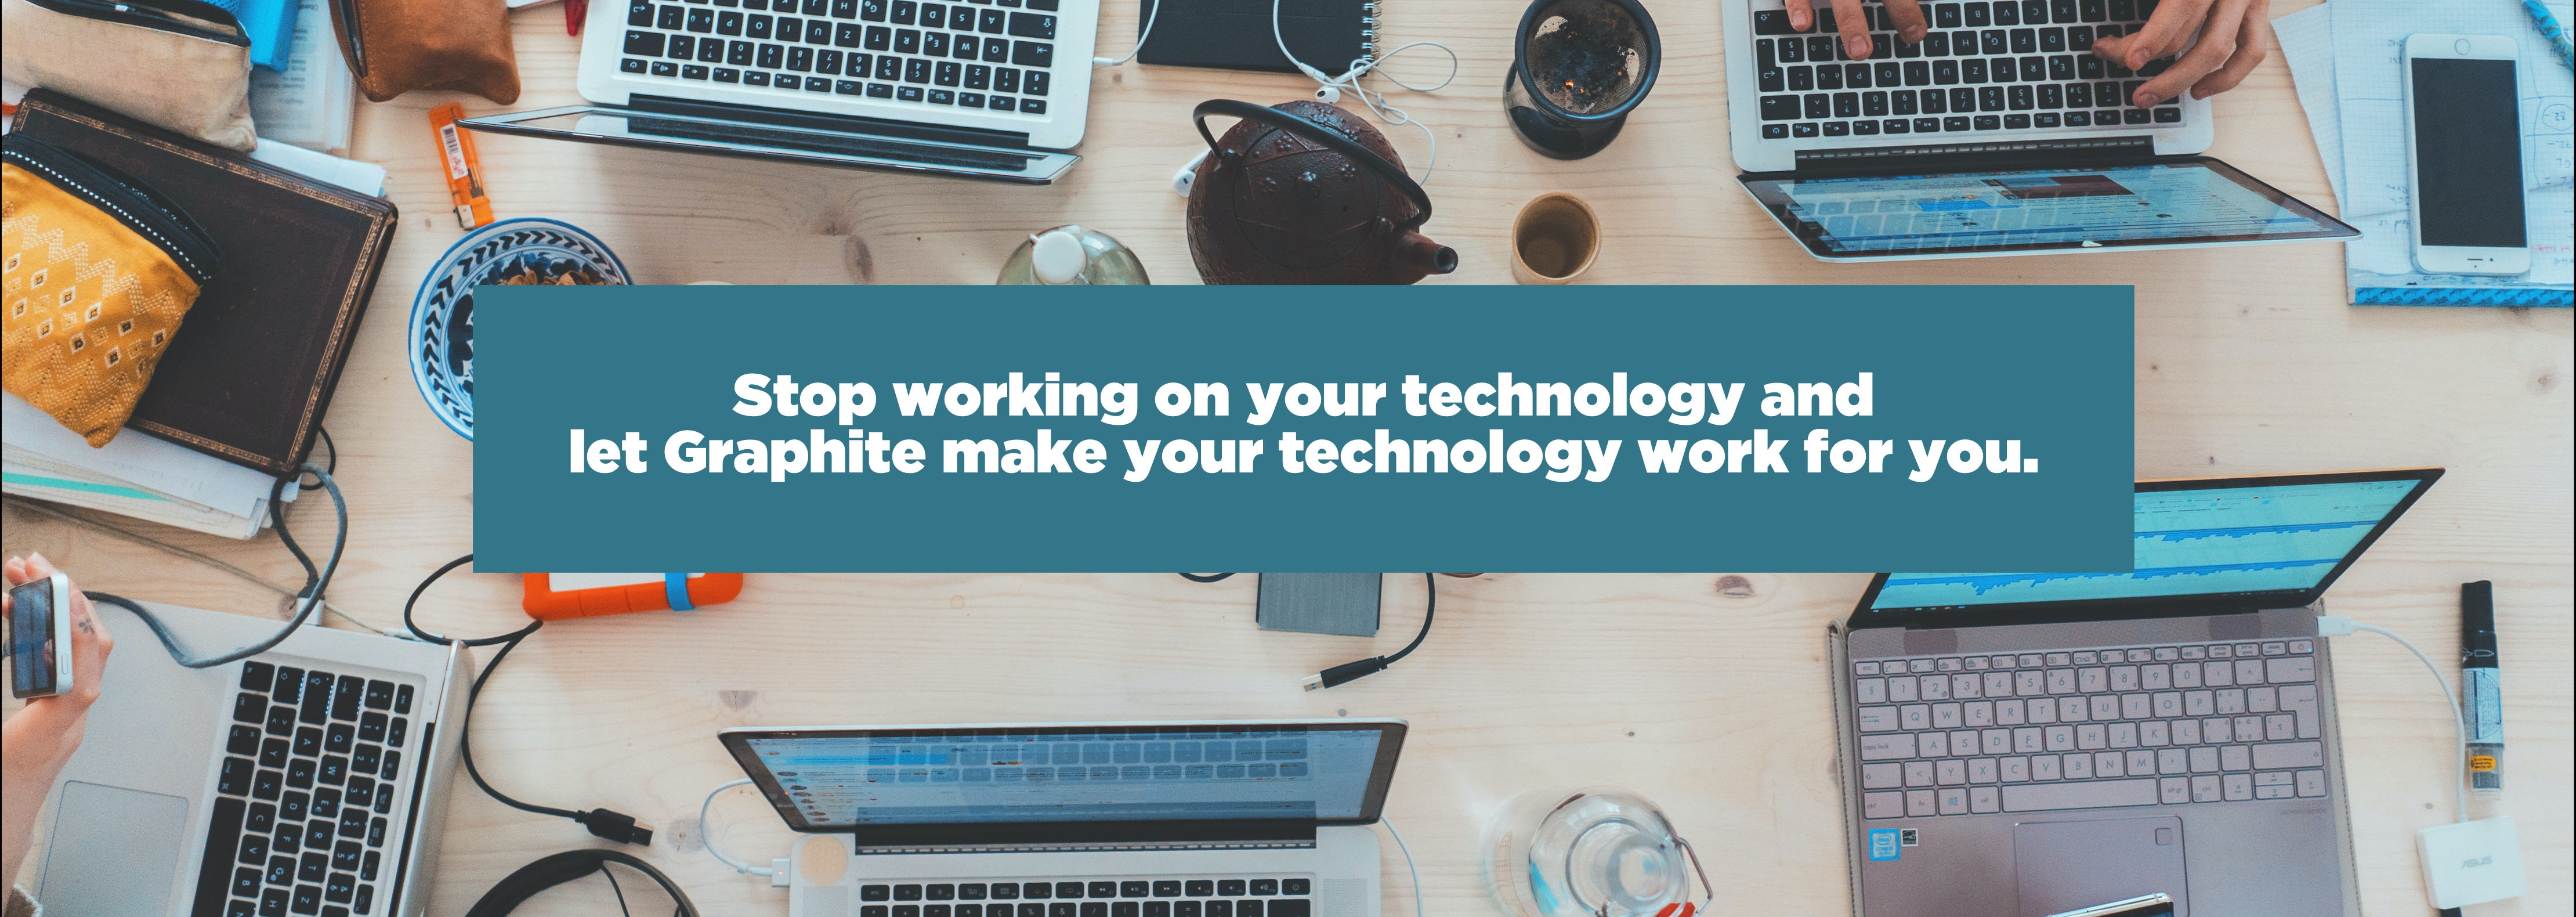 Stop working on your technology and let Graphite make your technology work for you.